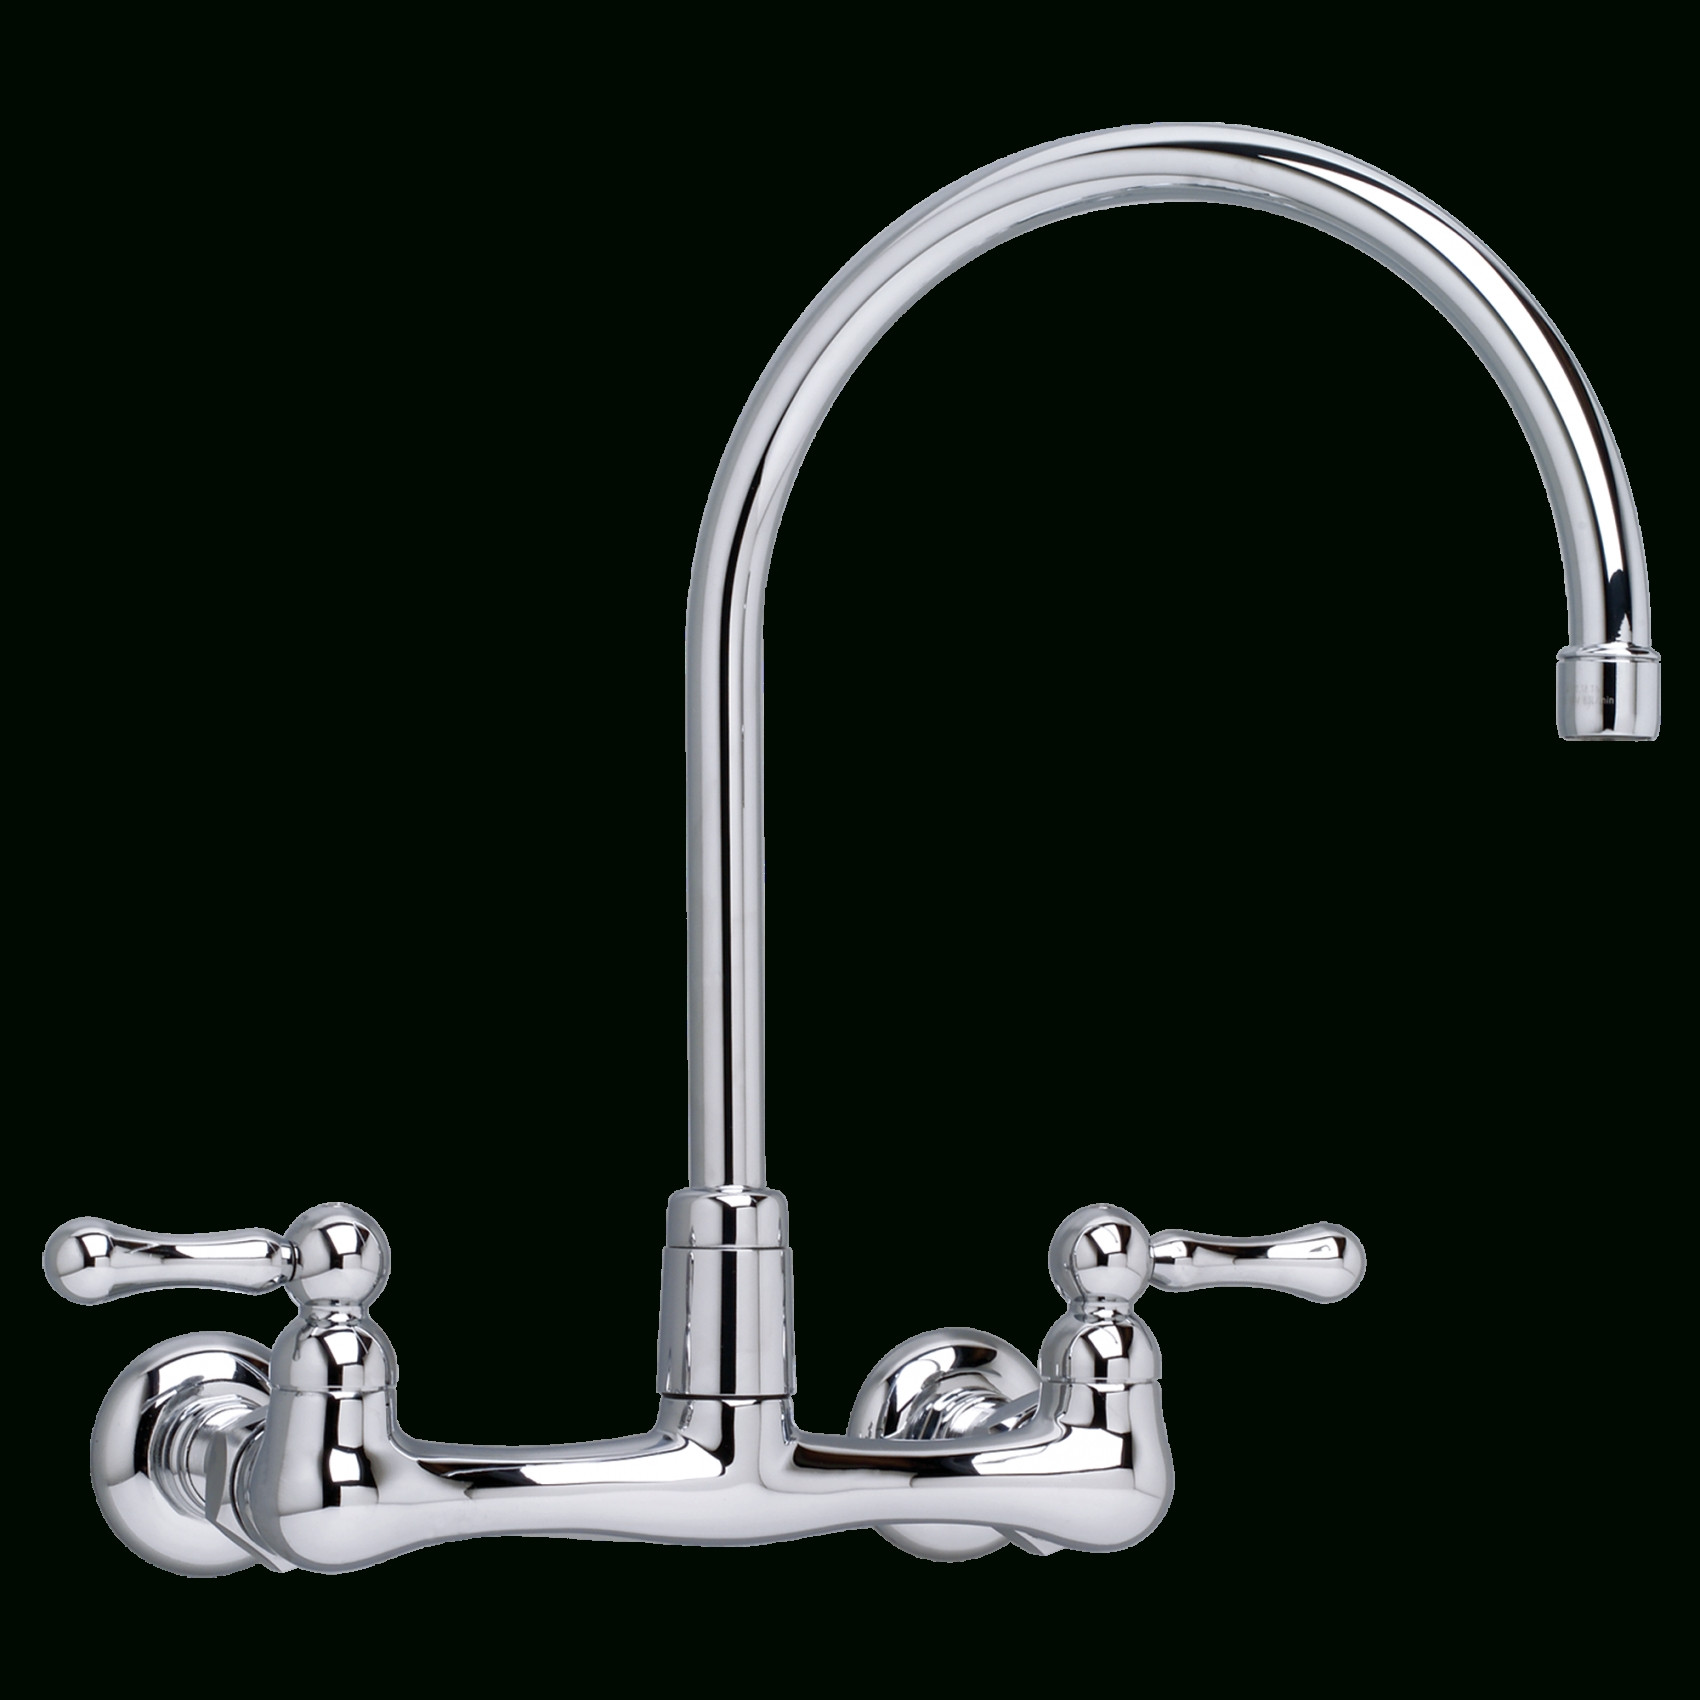 Commercial Kitchen Faucets Wall Mounted
 mercial Kitchen Faucets Wall Mounted